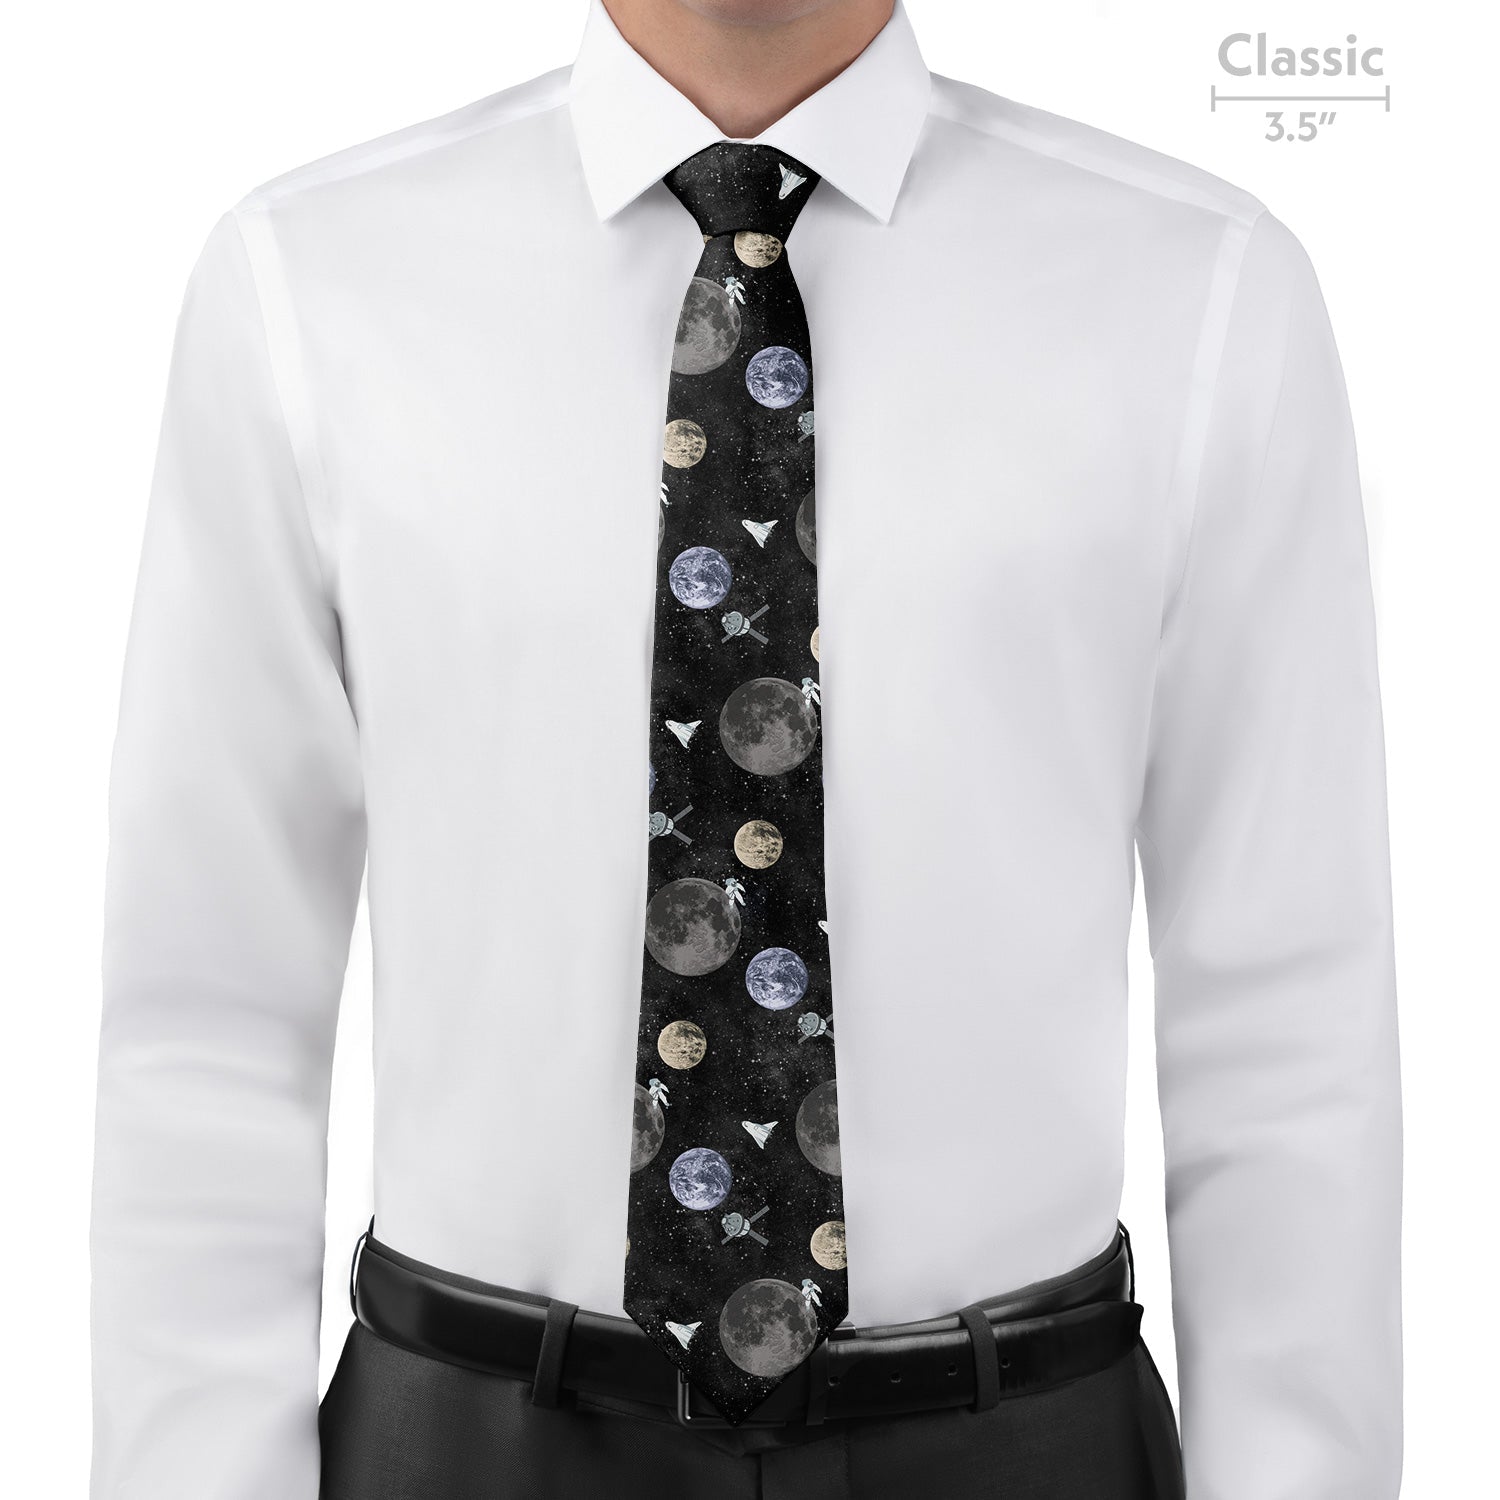 Outer Space Necktie - Classic - Knotty Tie Co.